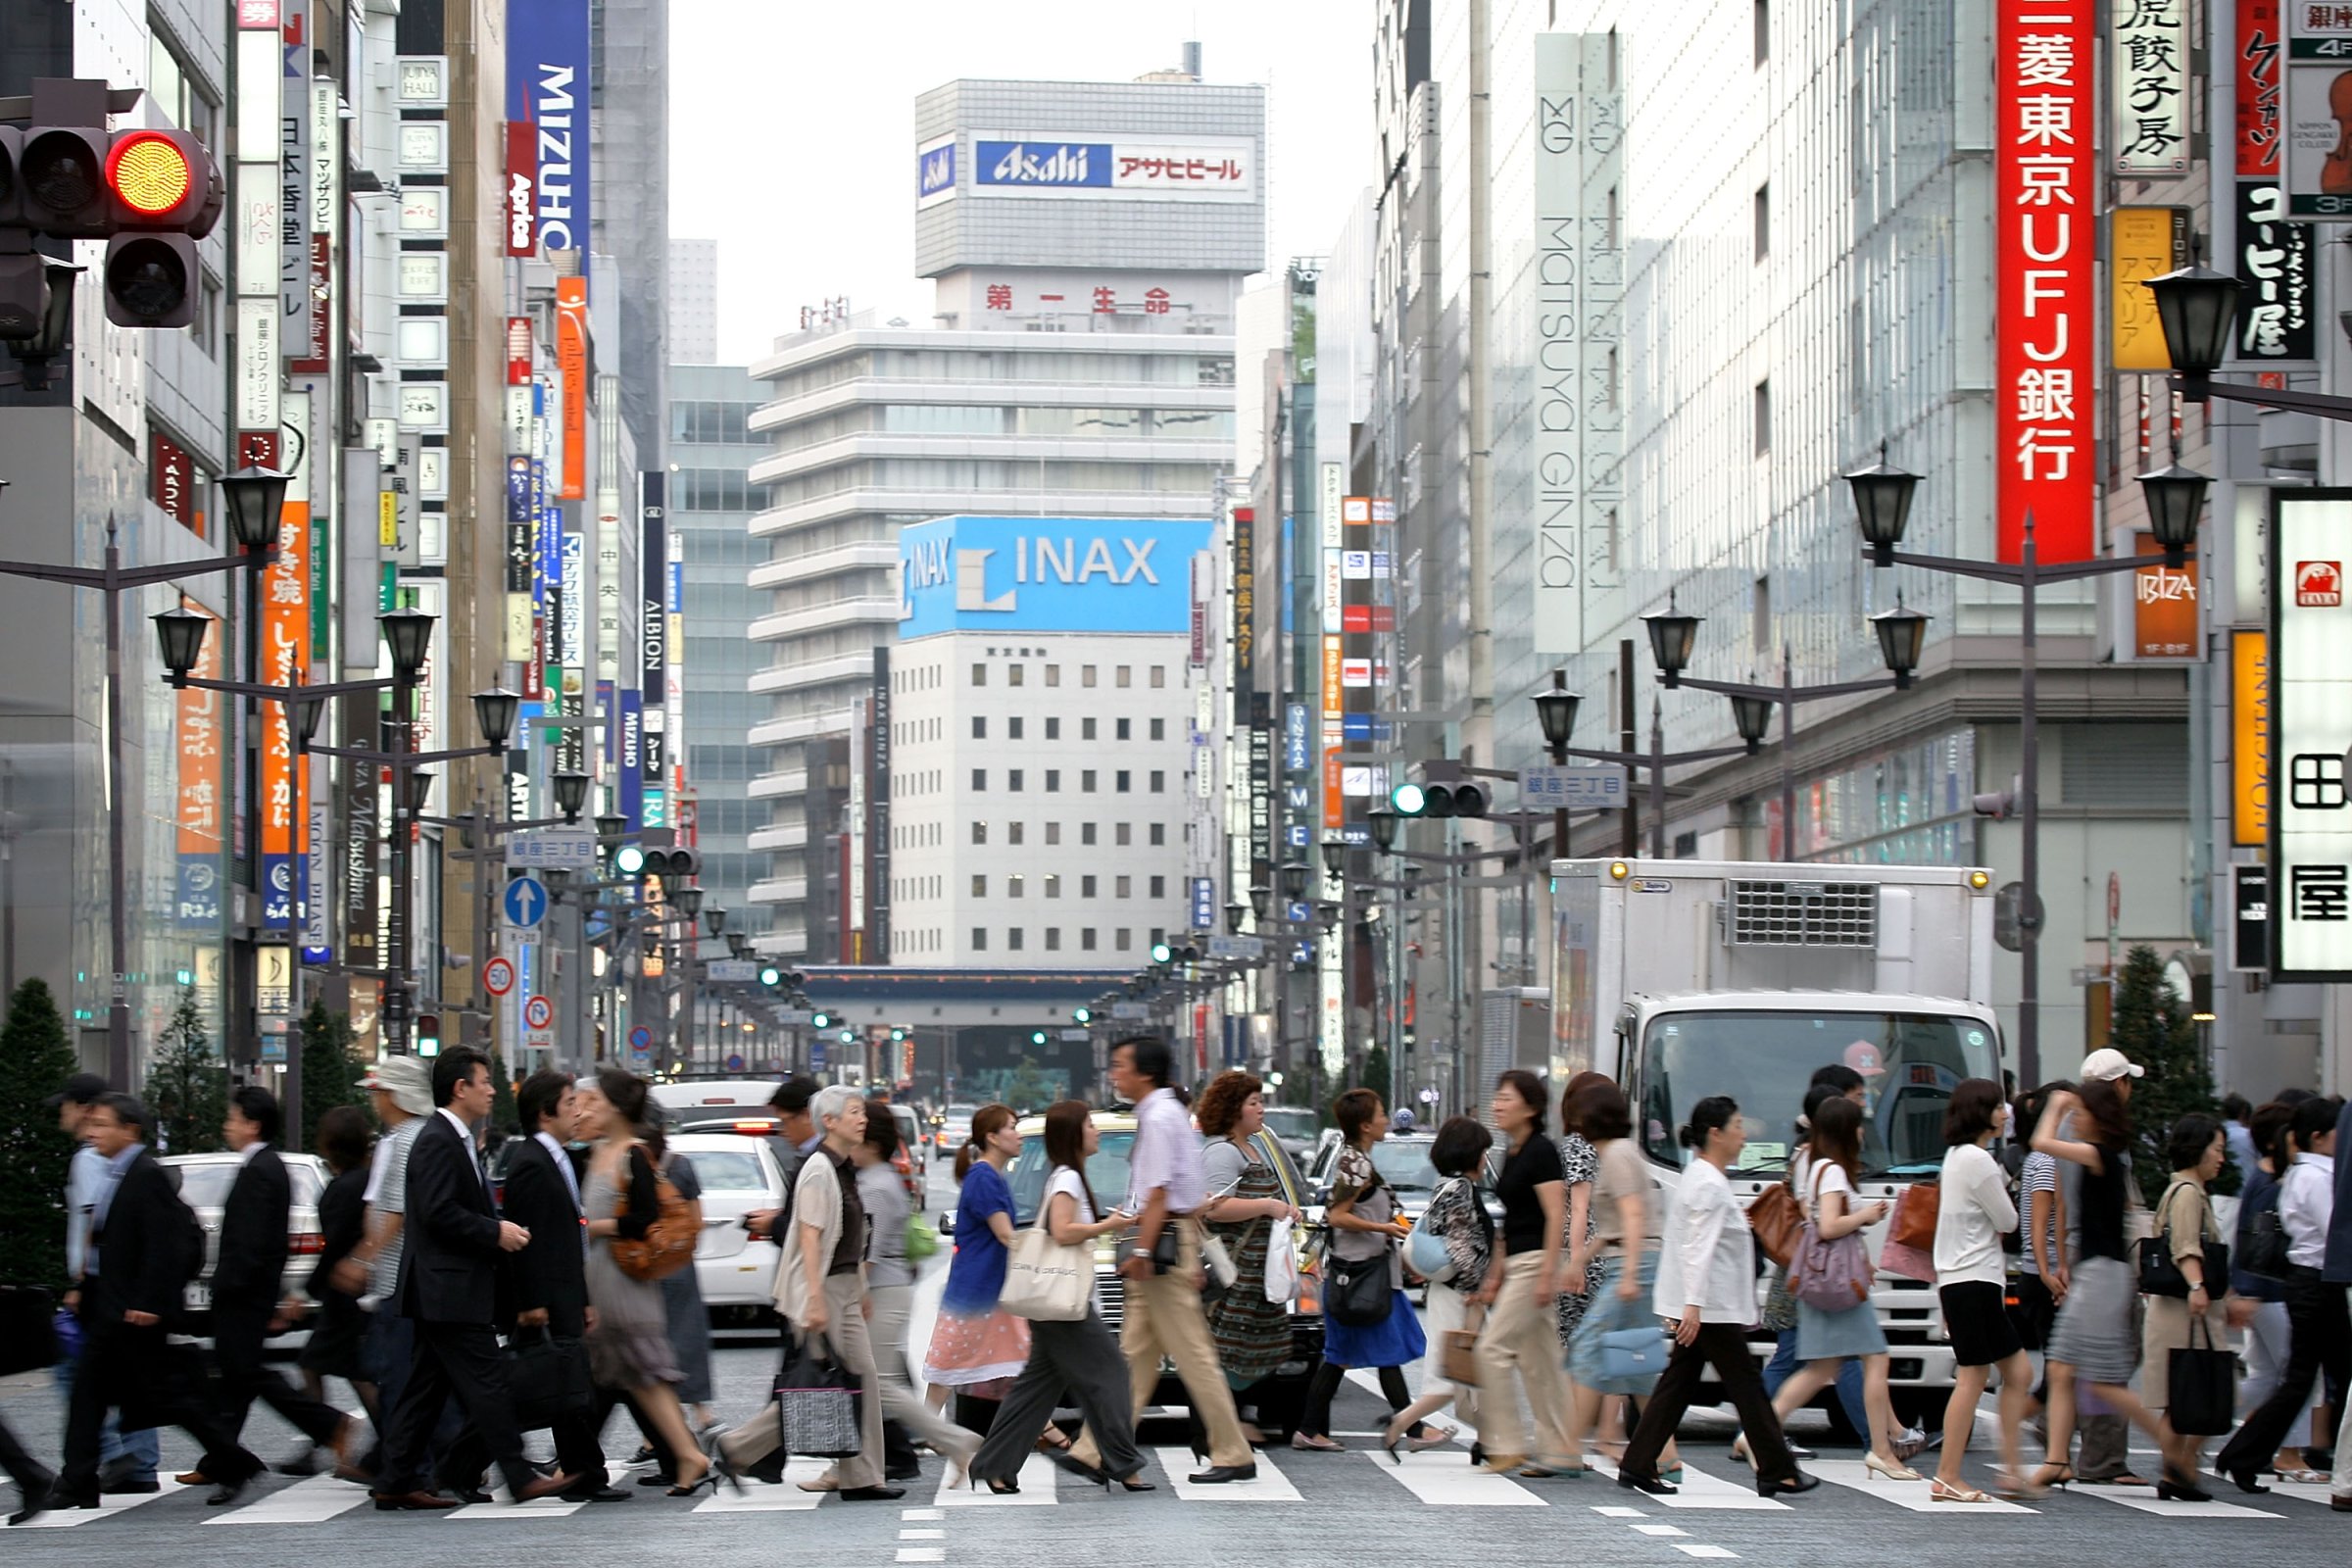 People walk across the street in the Ginza district on July 10, 2009 in Tokyo, Japan.